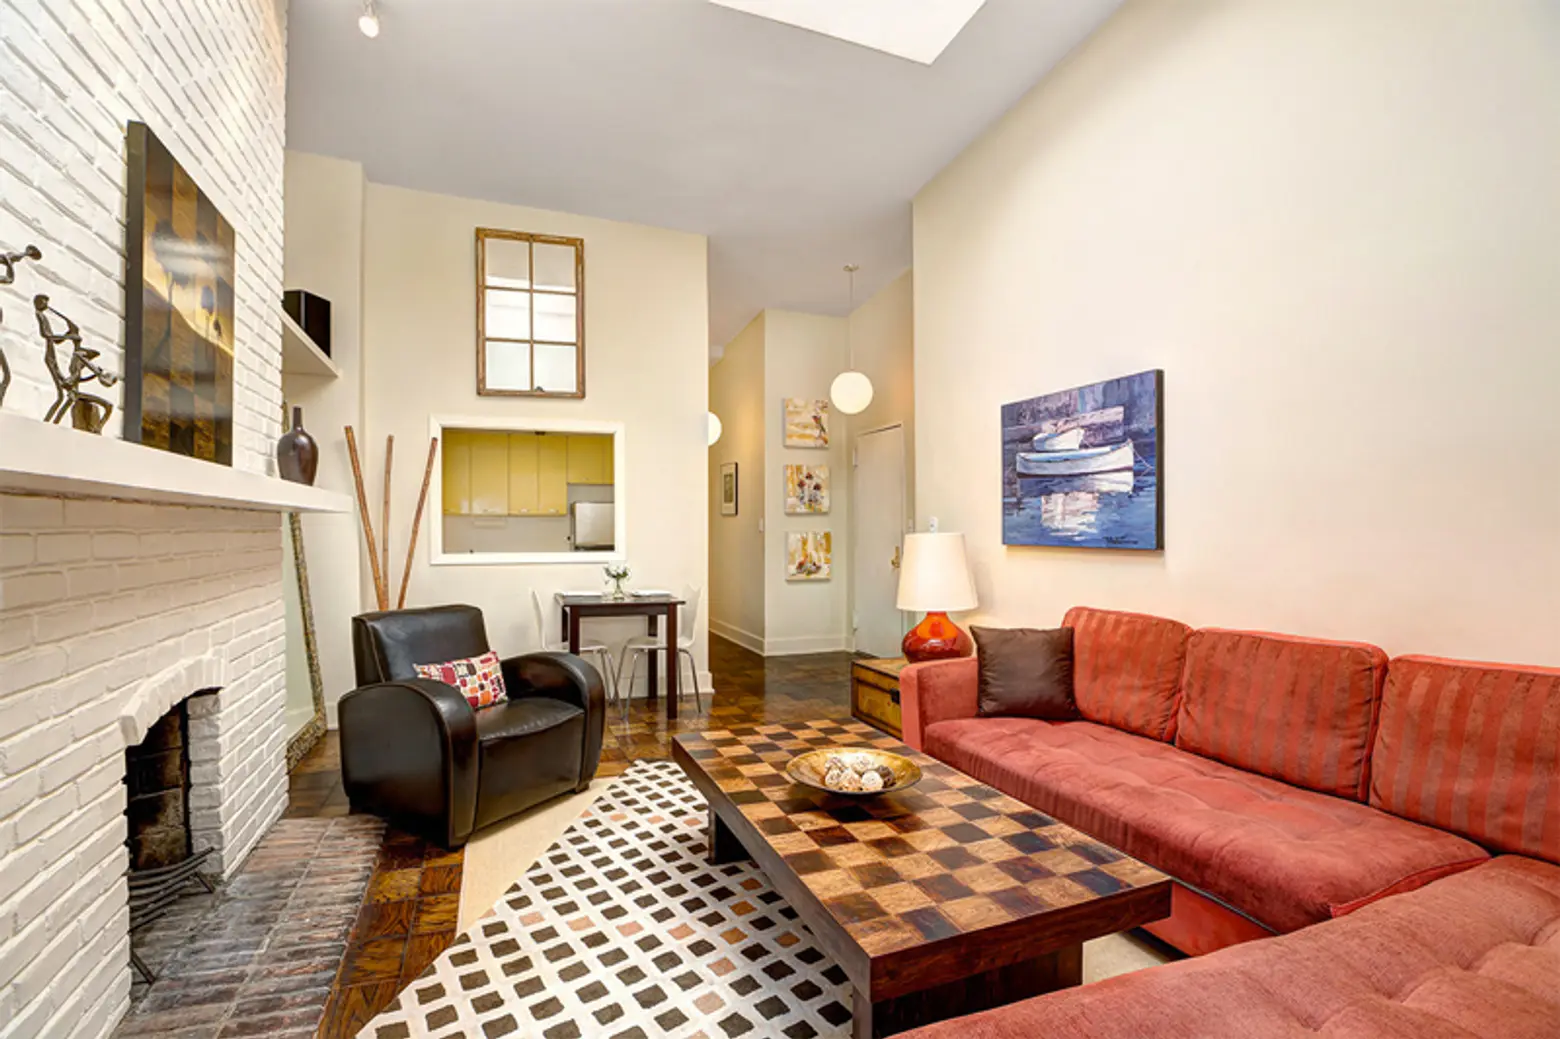 206 East 18th Street #6, Gramercy Park, apartment with skylight, pied-a-terre